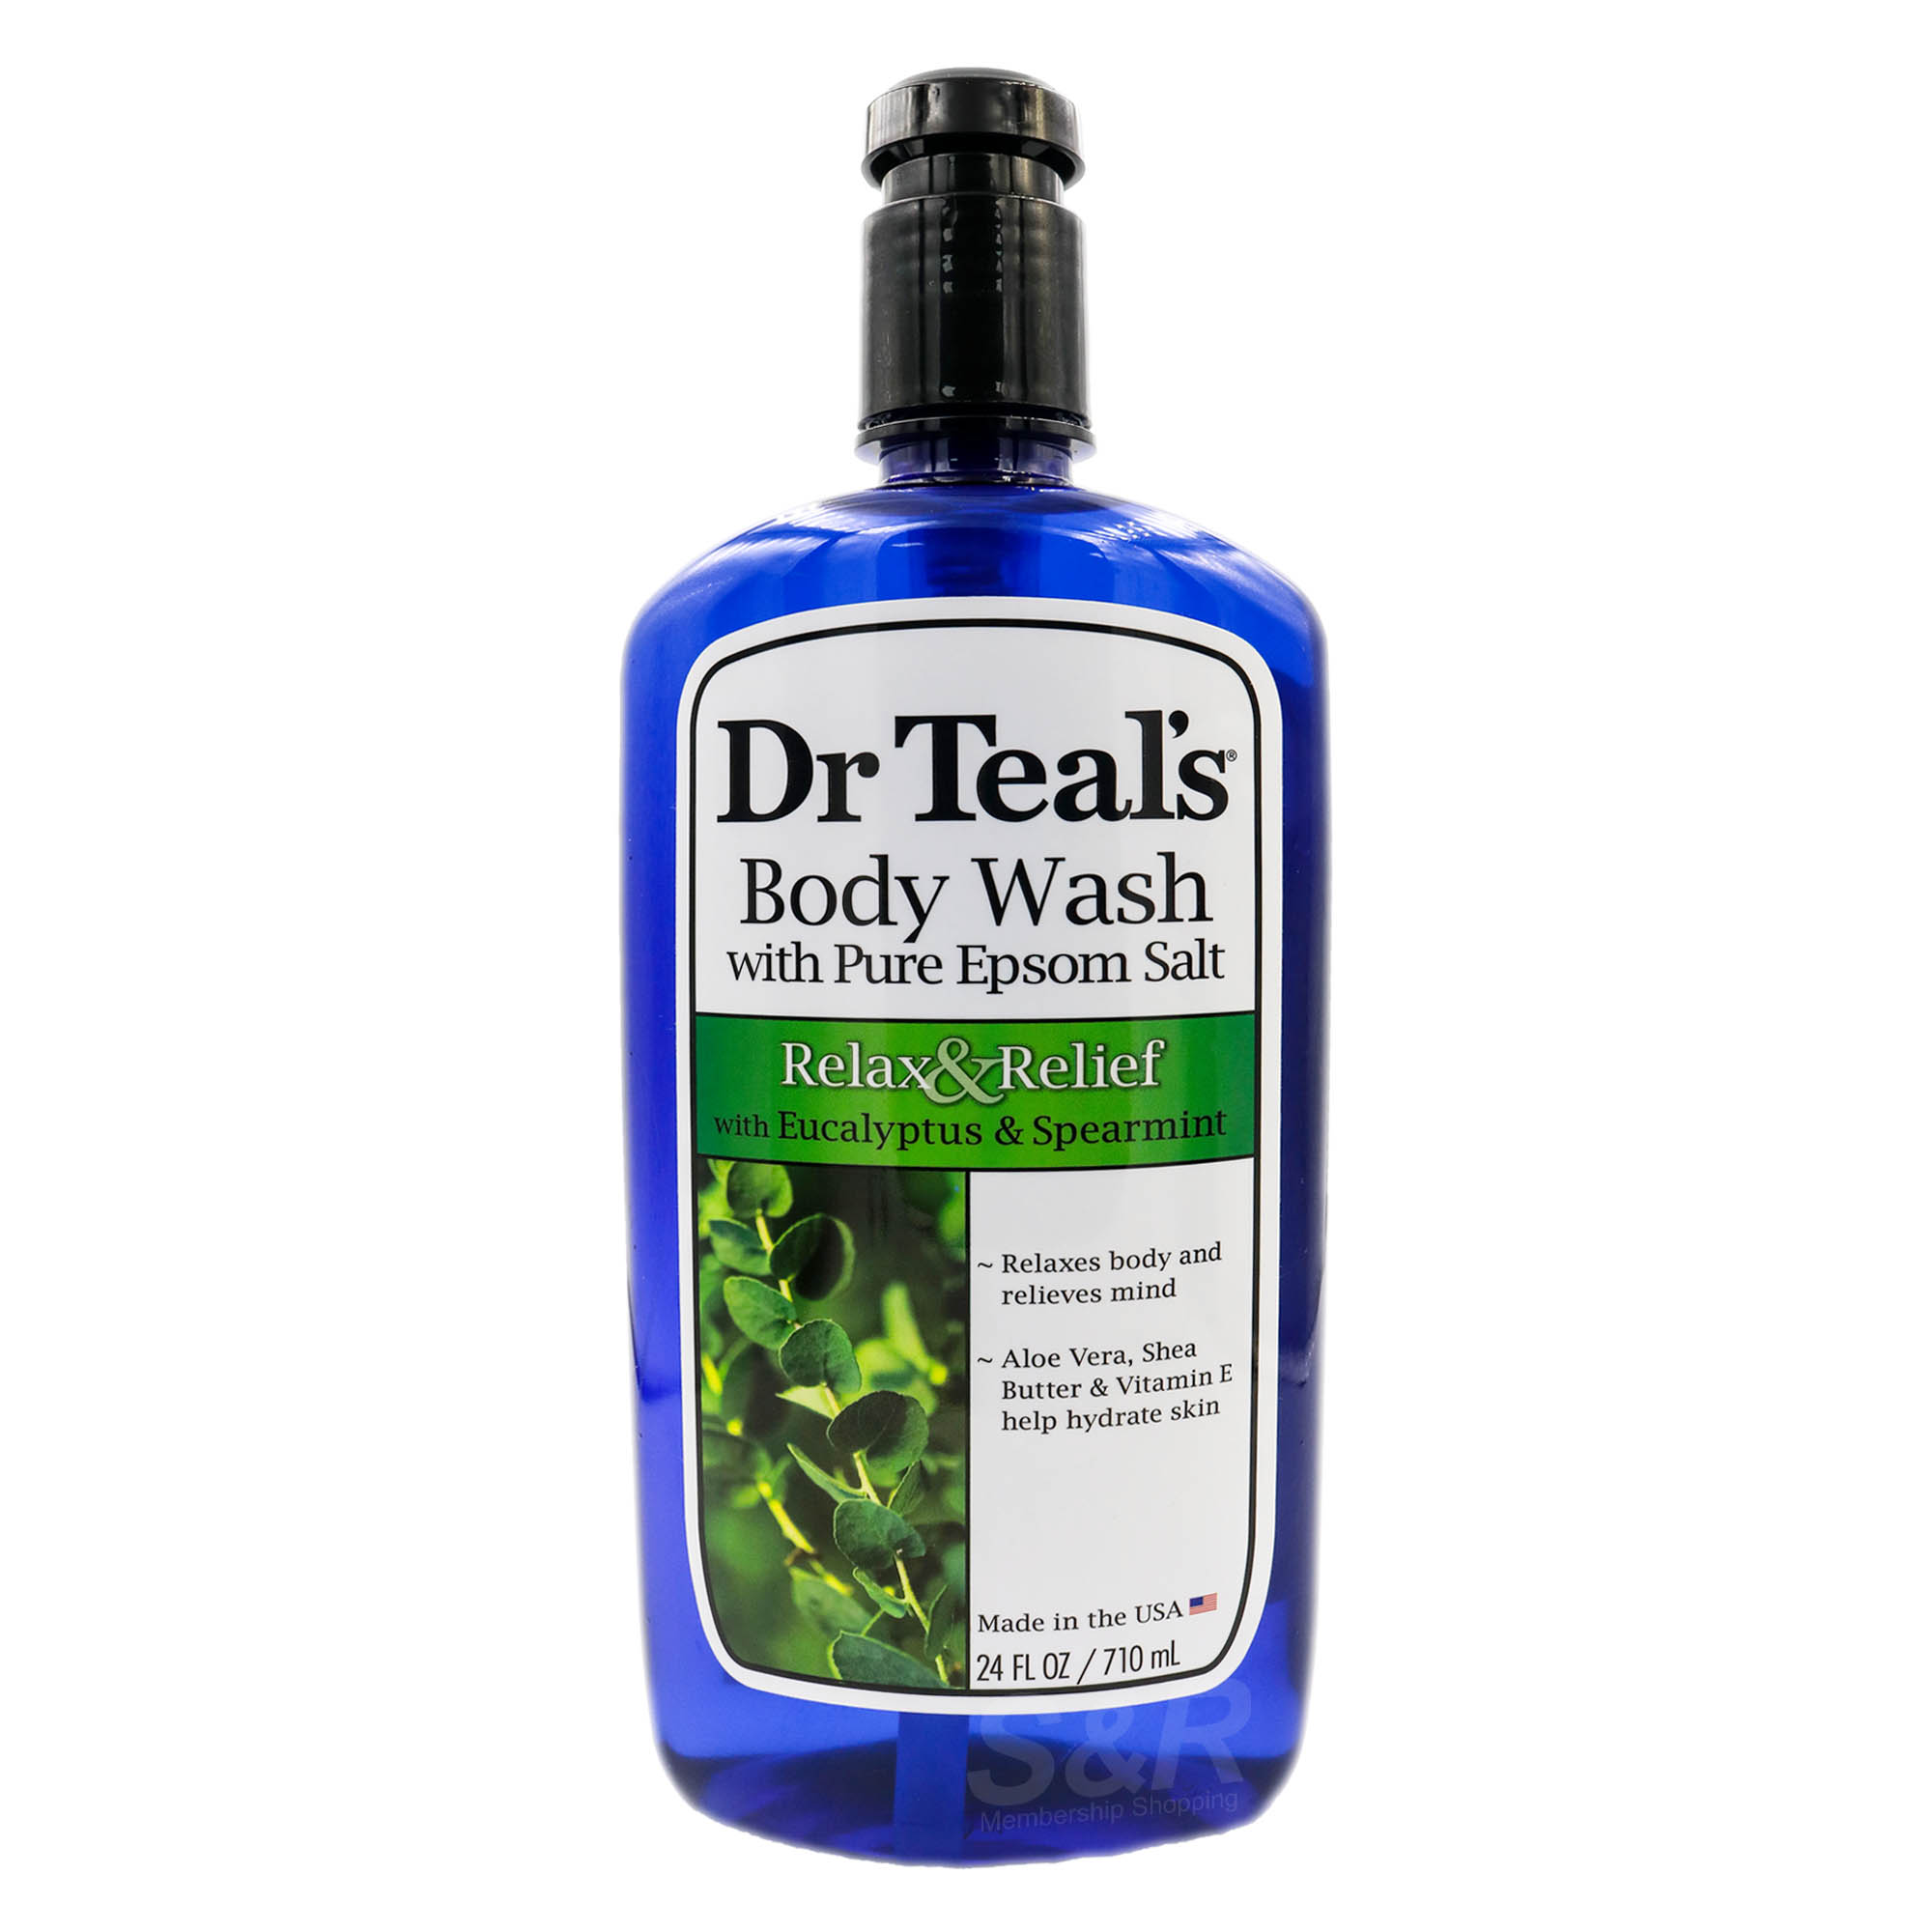 Dr. Teal's Relax, Relief Eucalyptus and Spearmint Body Wash with Pure Epsom Salt 710mL